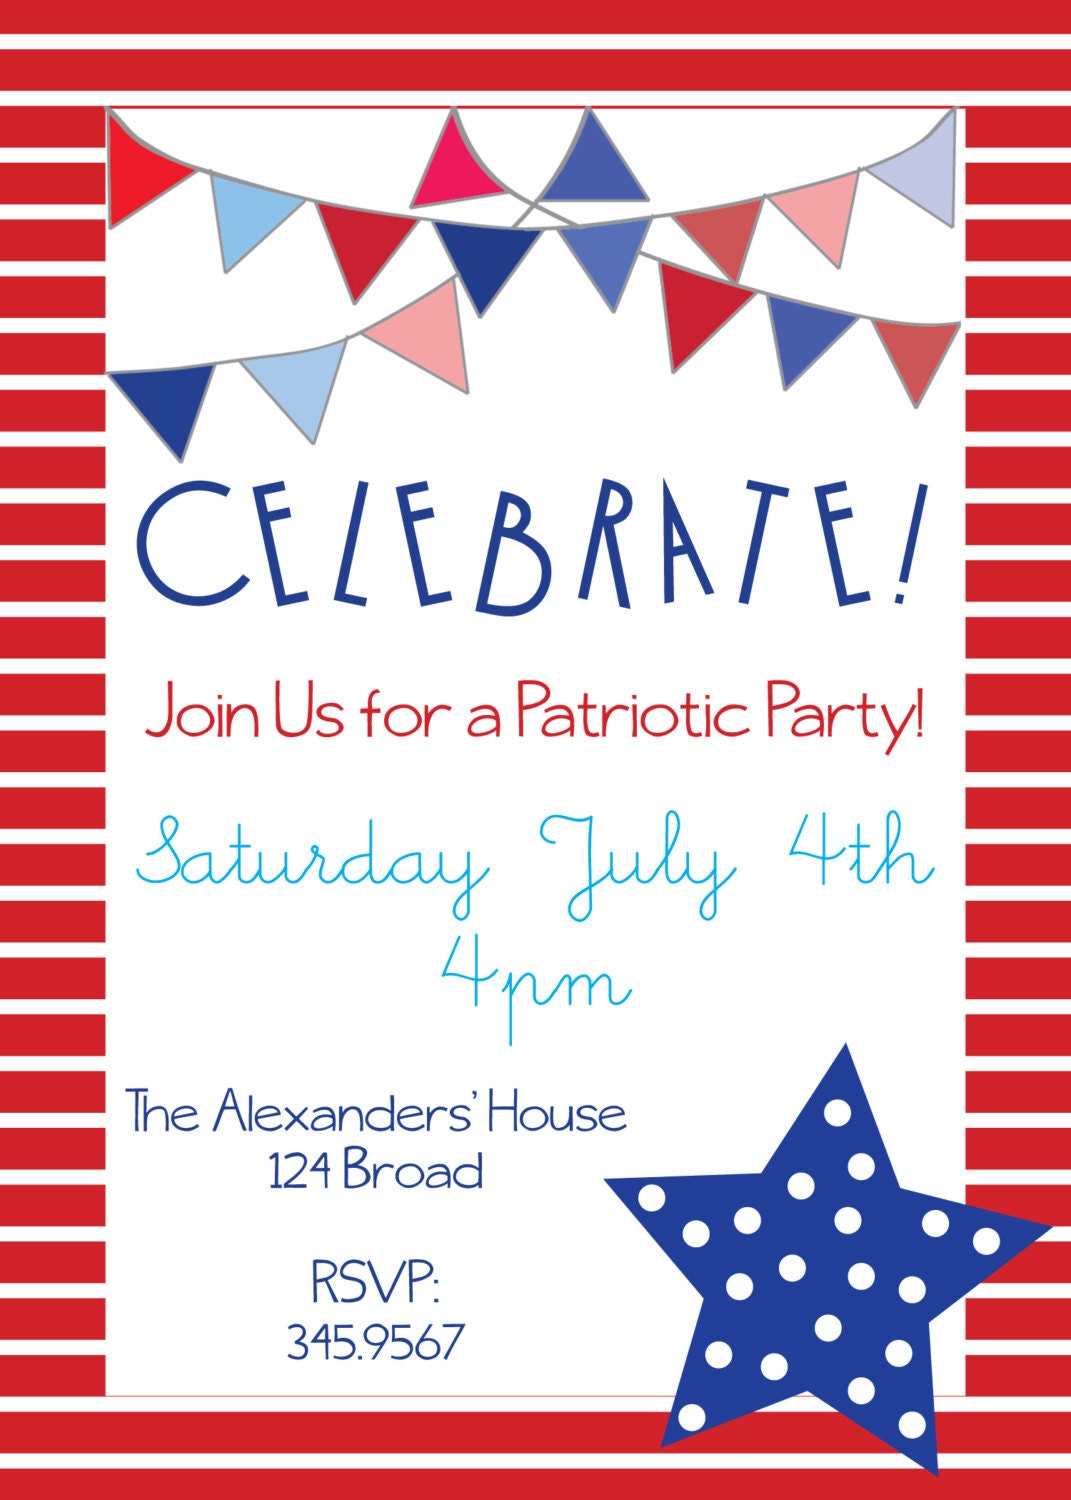 Patriotic Party Invitations For Memorial Day 4th of July or